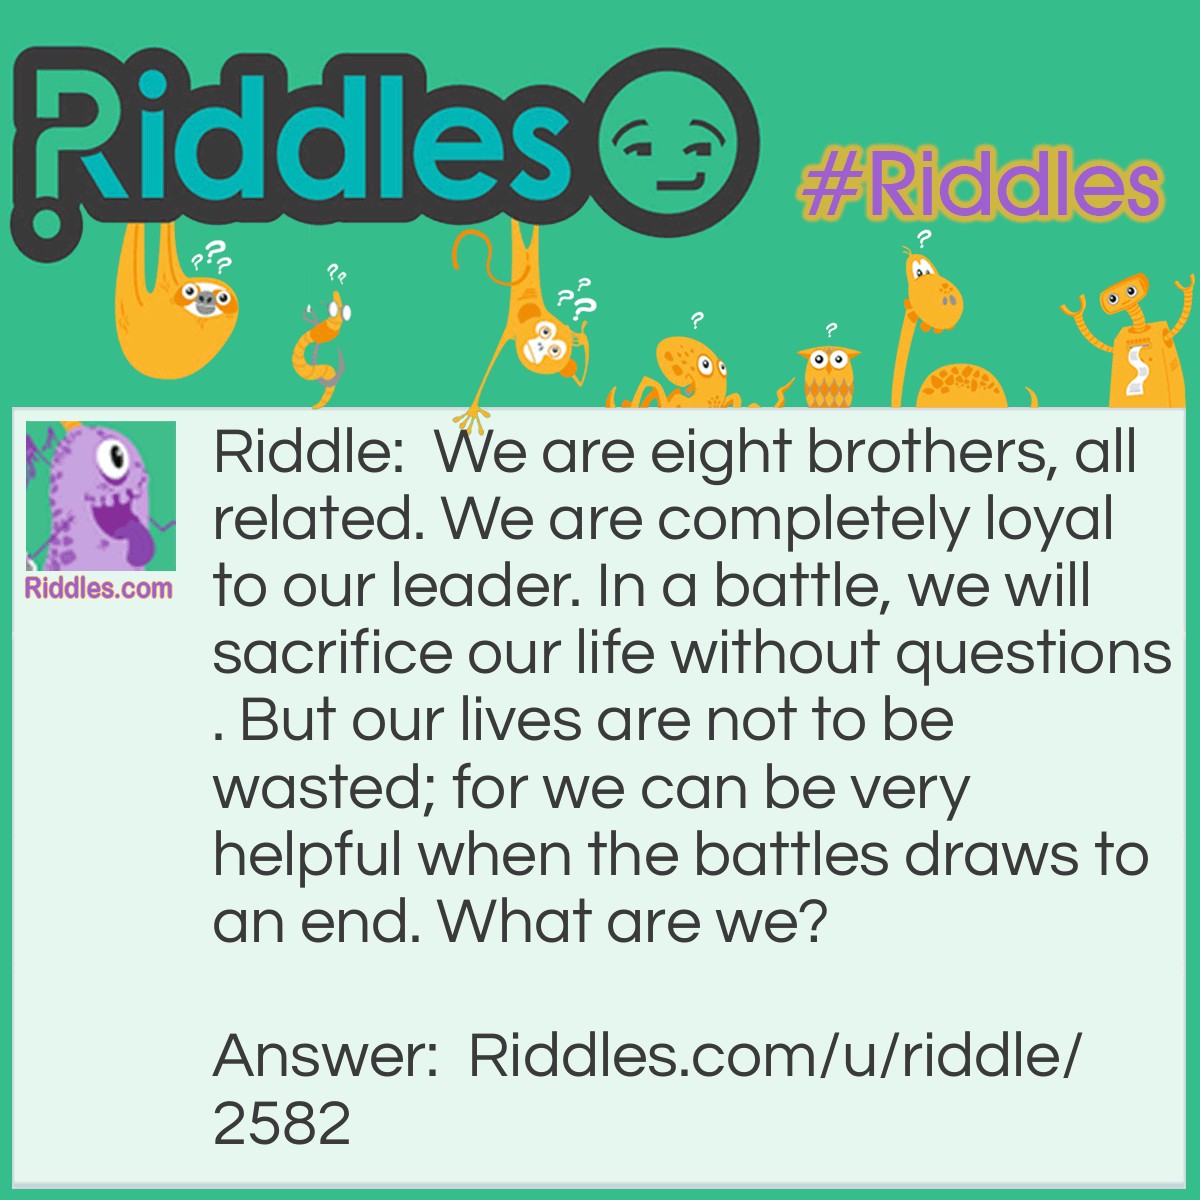 Riddle: We are eight brothers, all related. We are completely loyal to our leader. In a battle, we will sacrifice our life without questions. But our lives are not to be wasted; for we can be very helpful when the battles draws to an end. What are we? Answer: Chess Pawns.